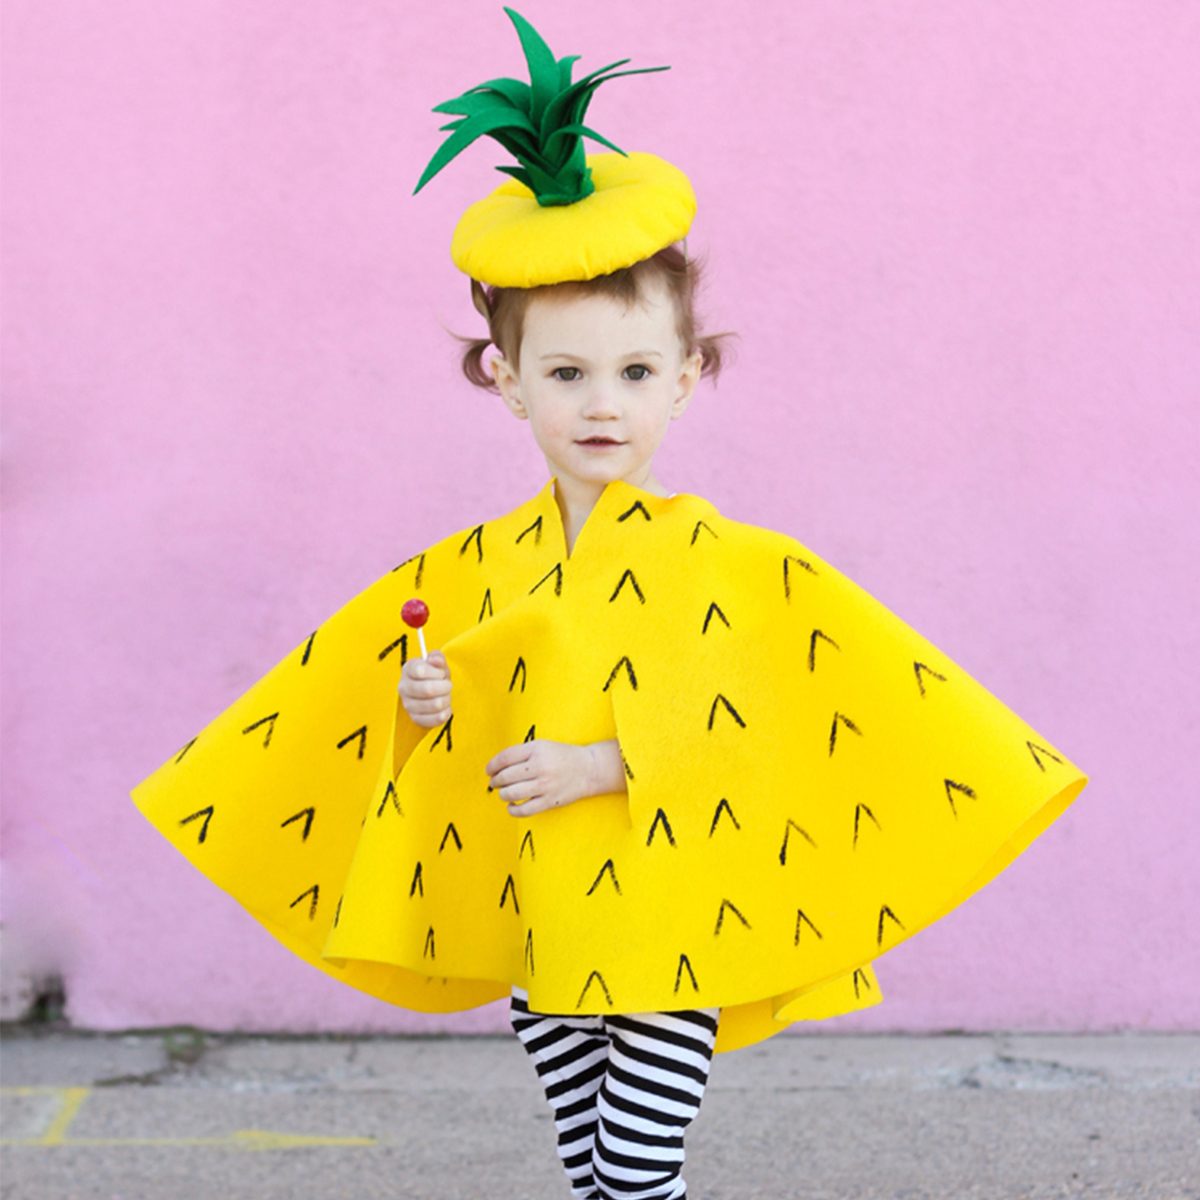 How to Make DIY Kids Costume from Recycled Materials